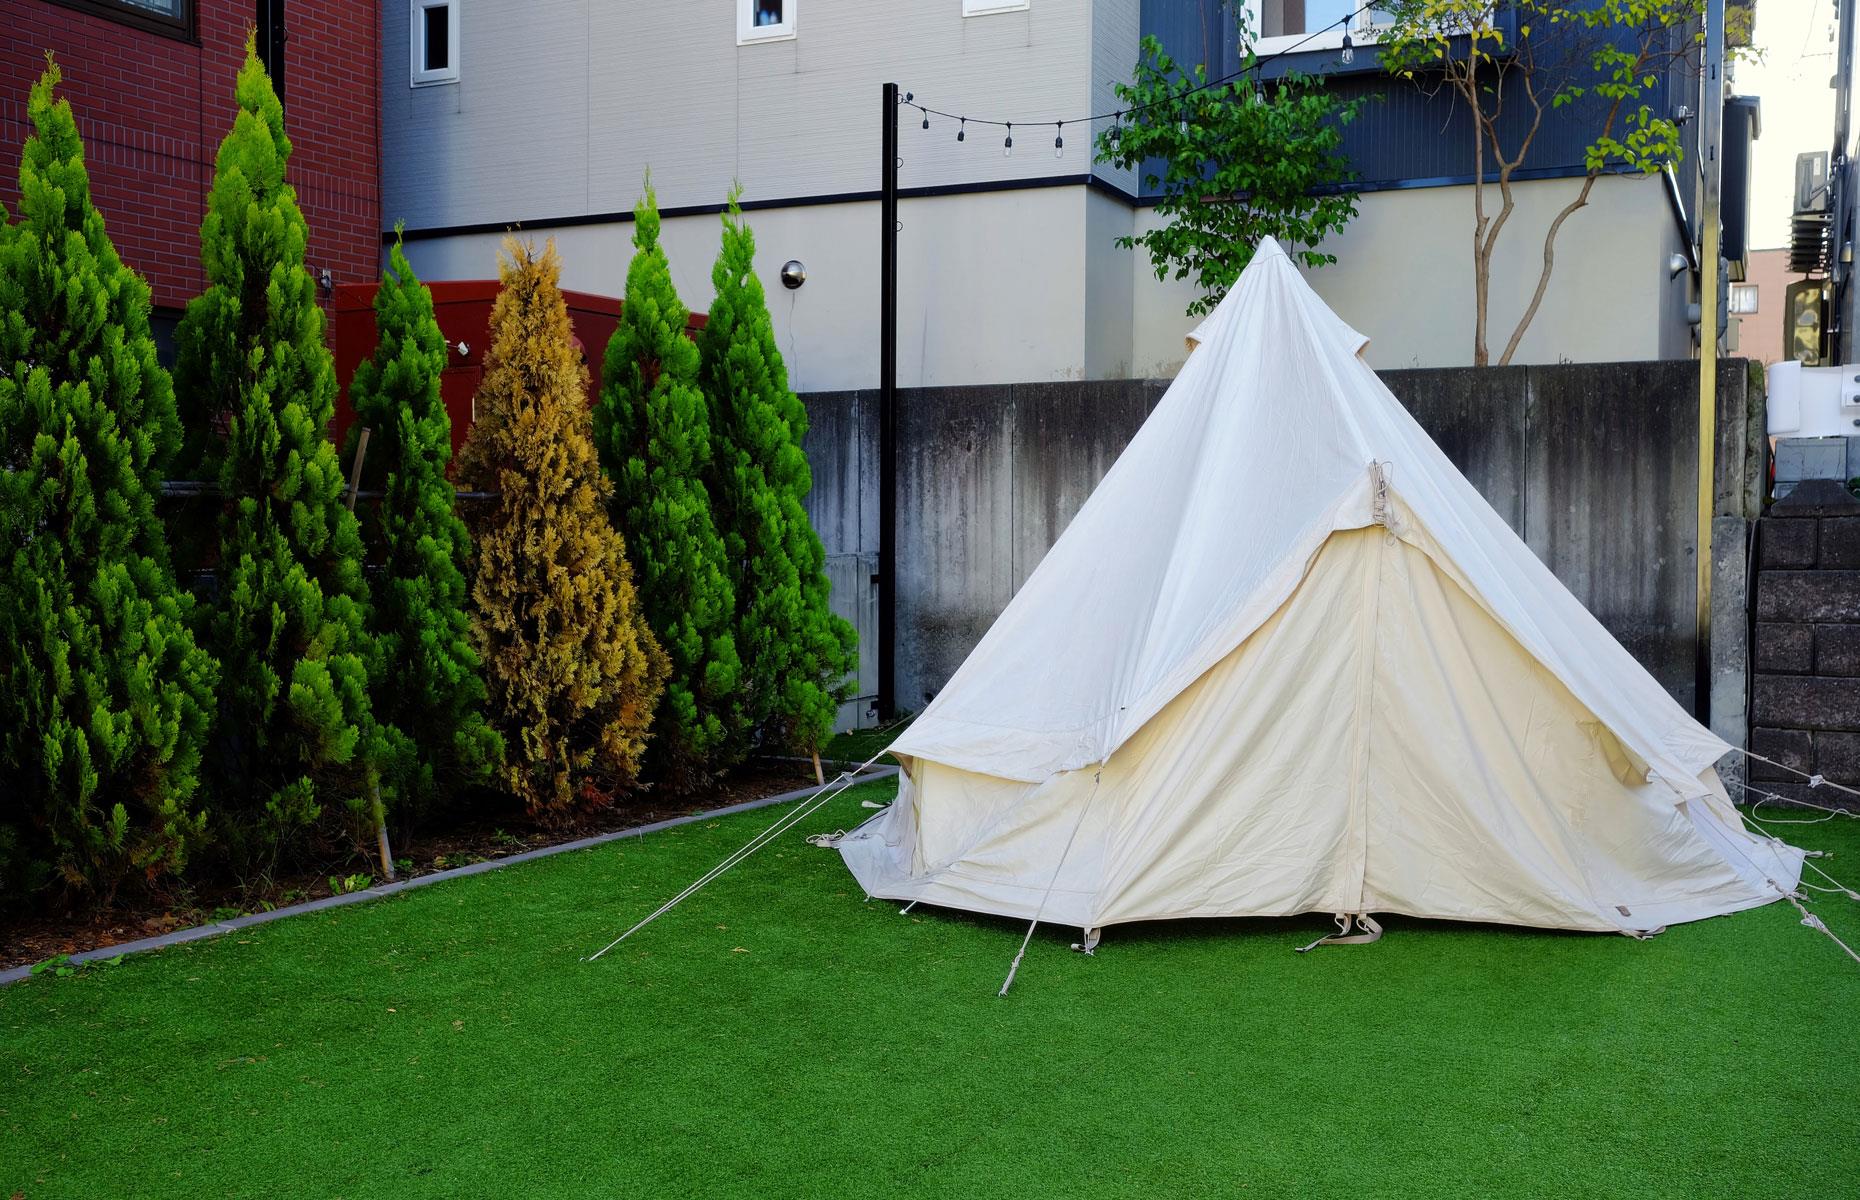 Renting out a tent in their backyard